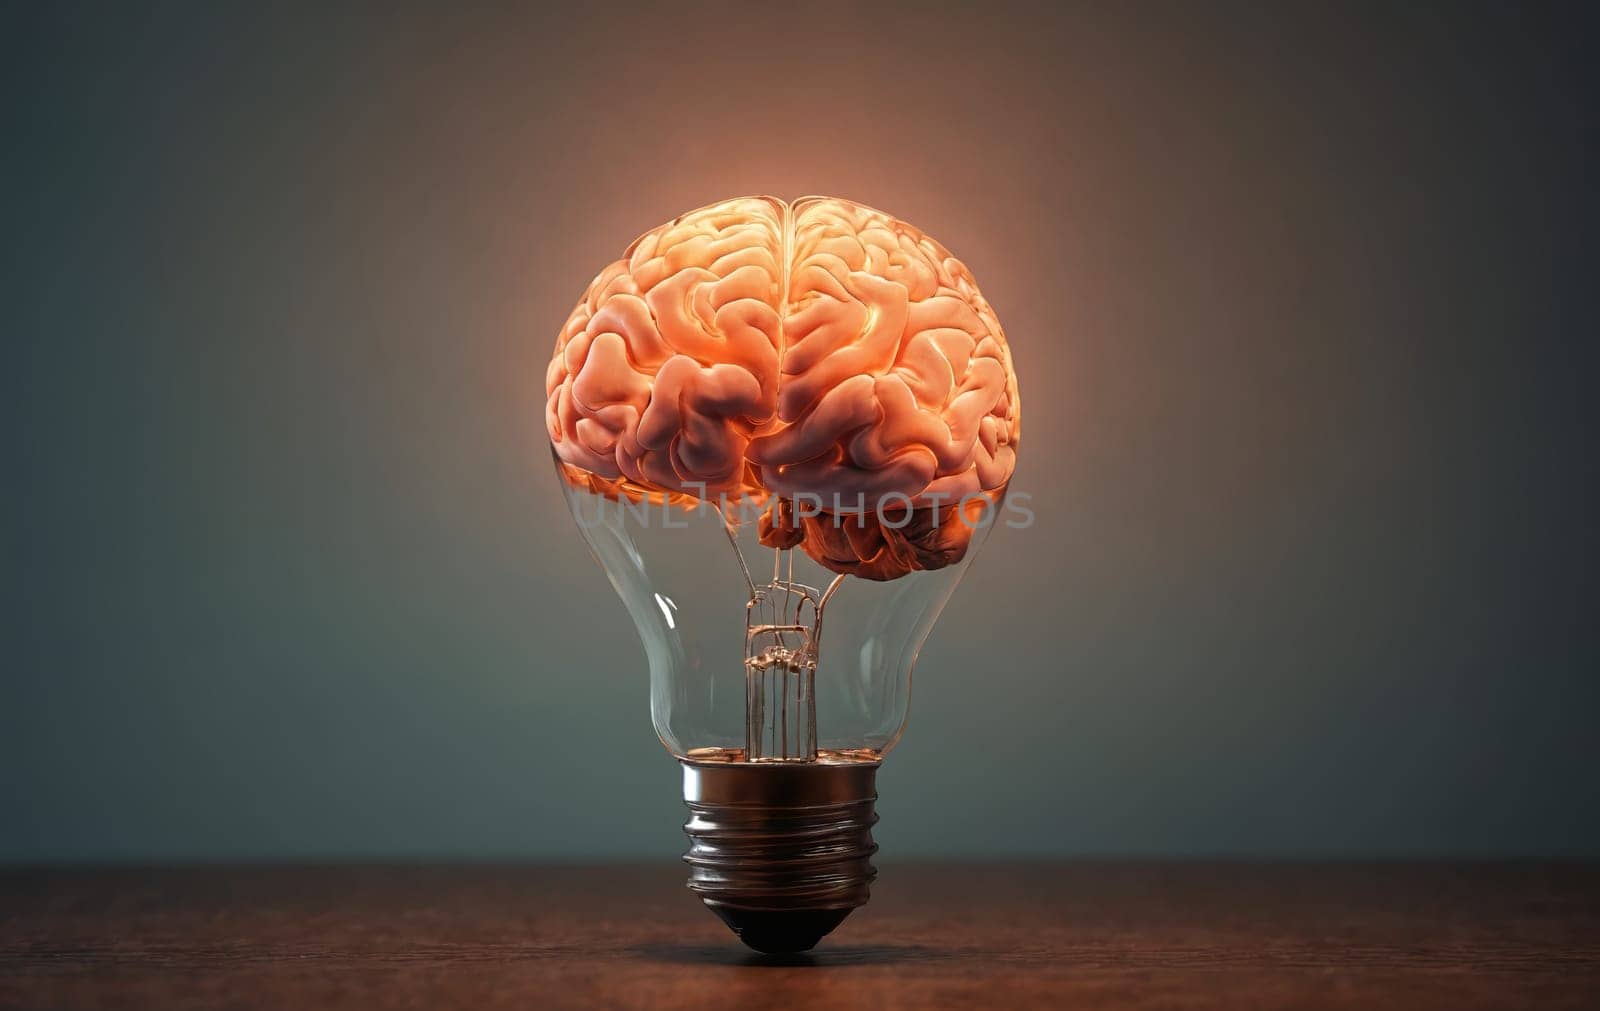 Human brain in a light bulb on a dark background. Brainstorming concept by Andre1ns